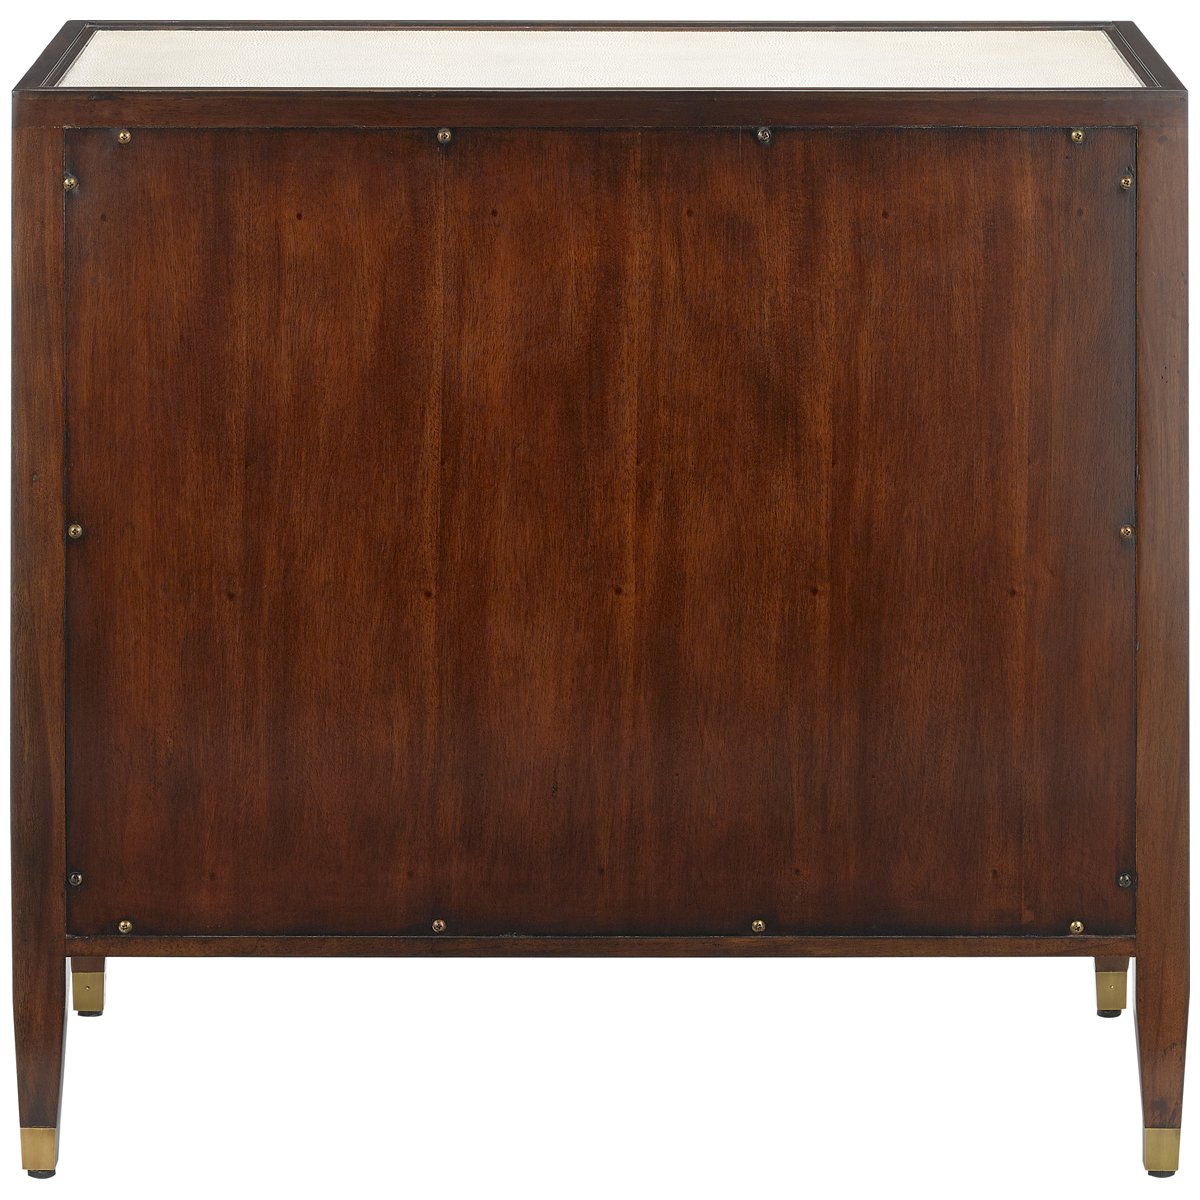 Currey and Company Evie Shagreen Chest